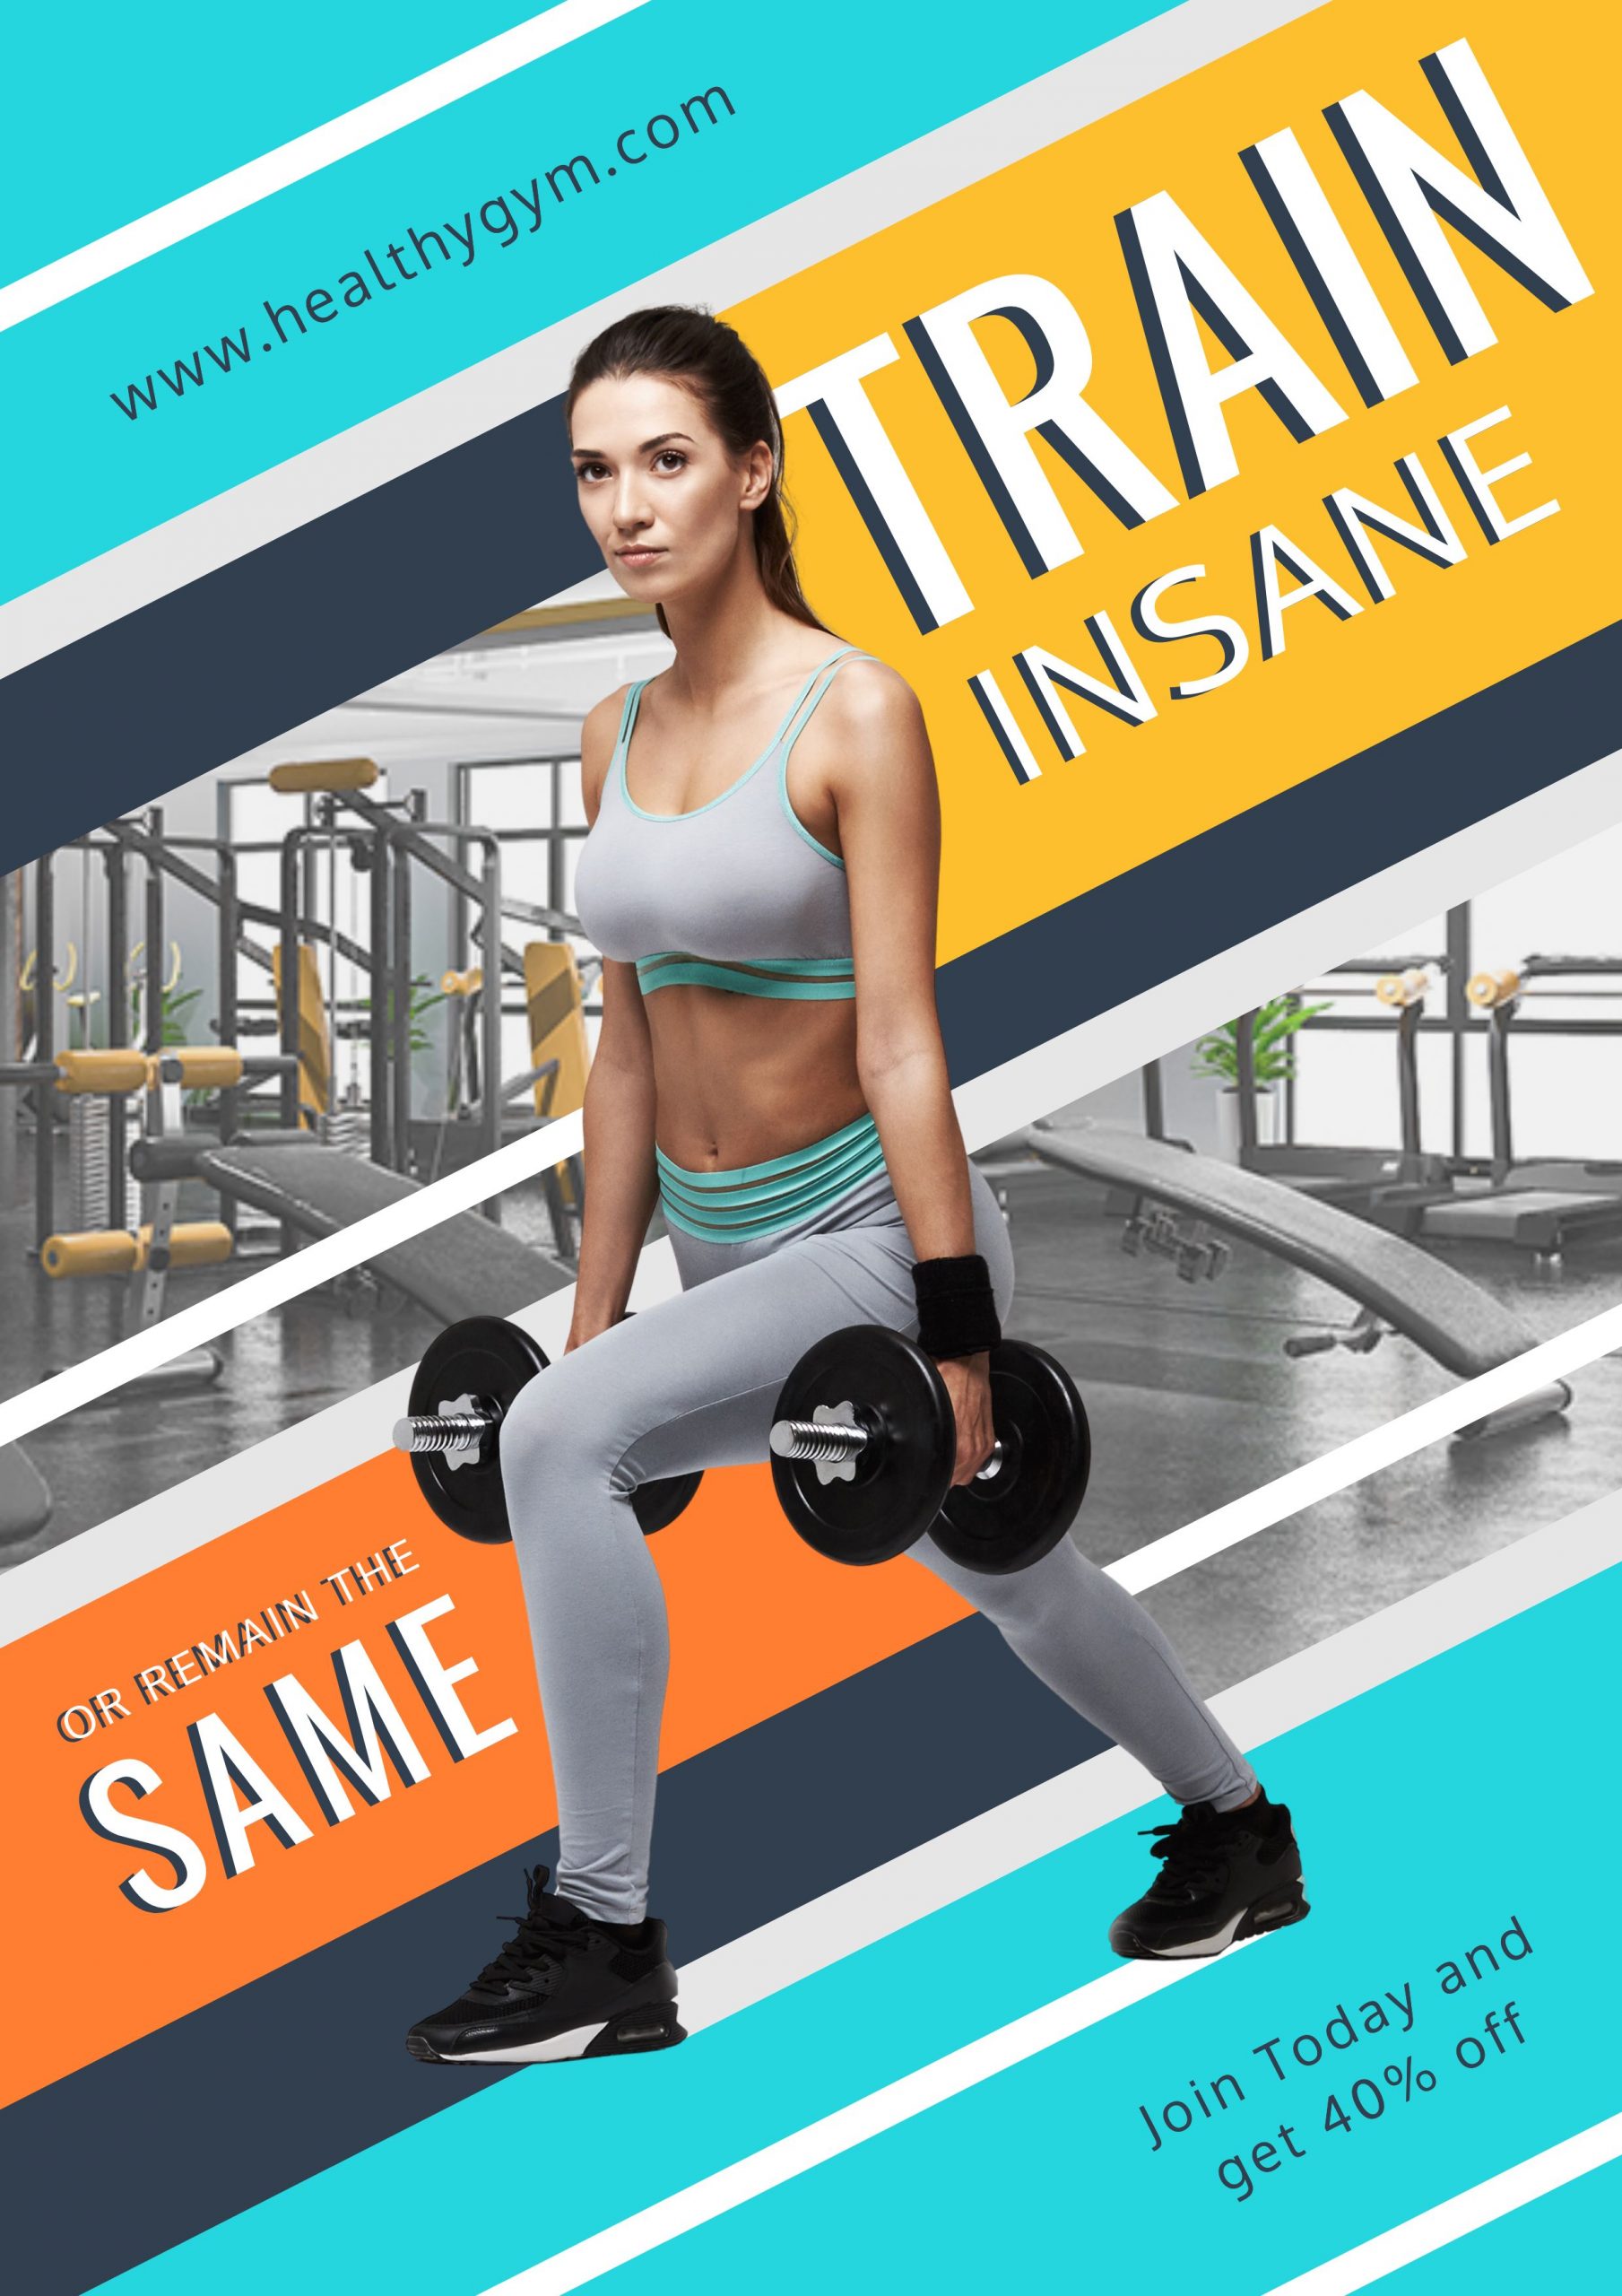 Gym Poster Template